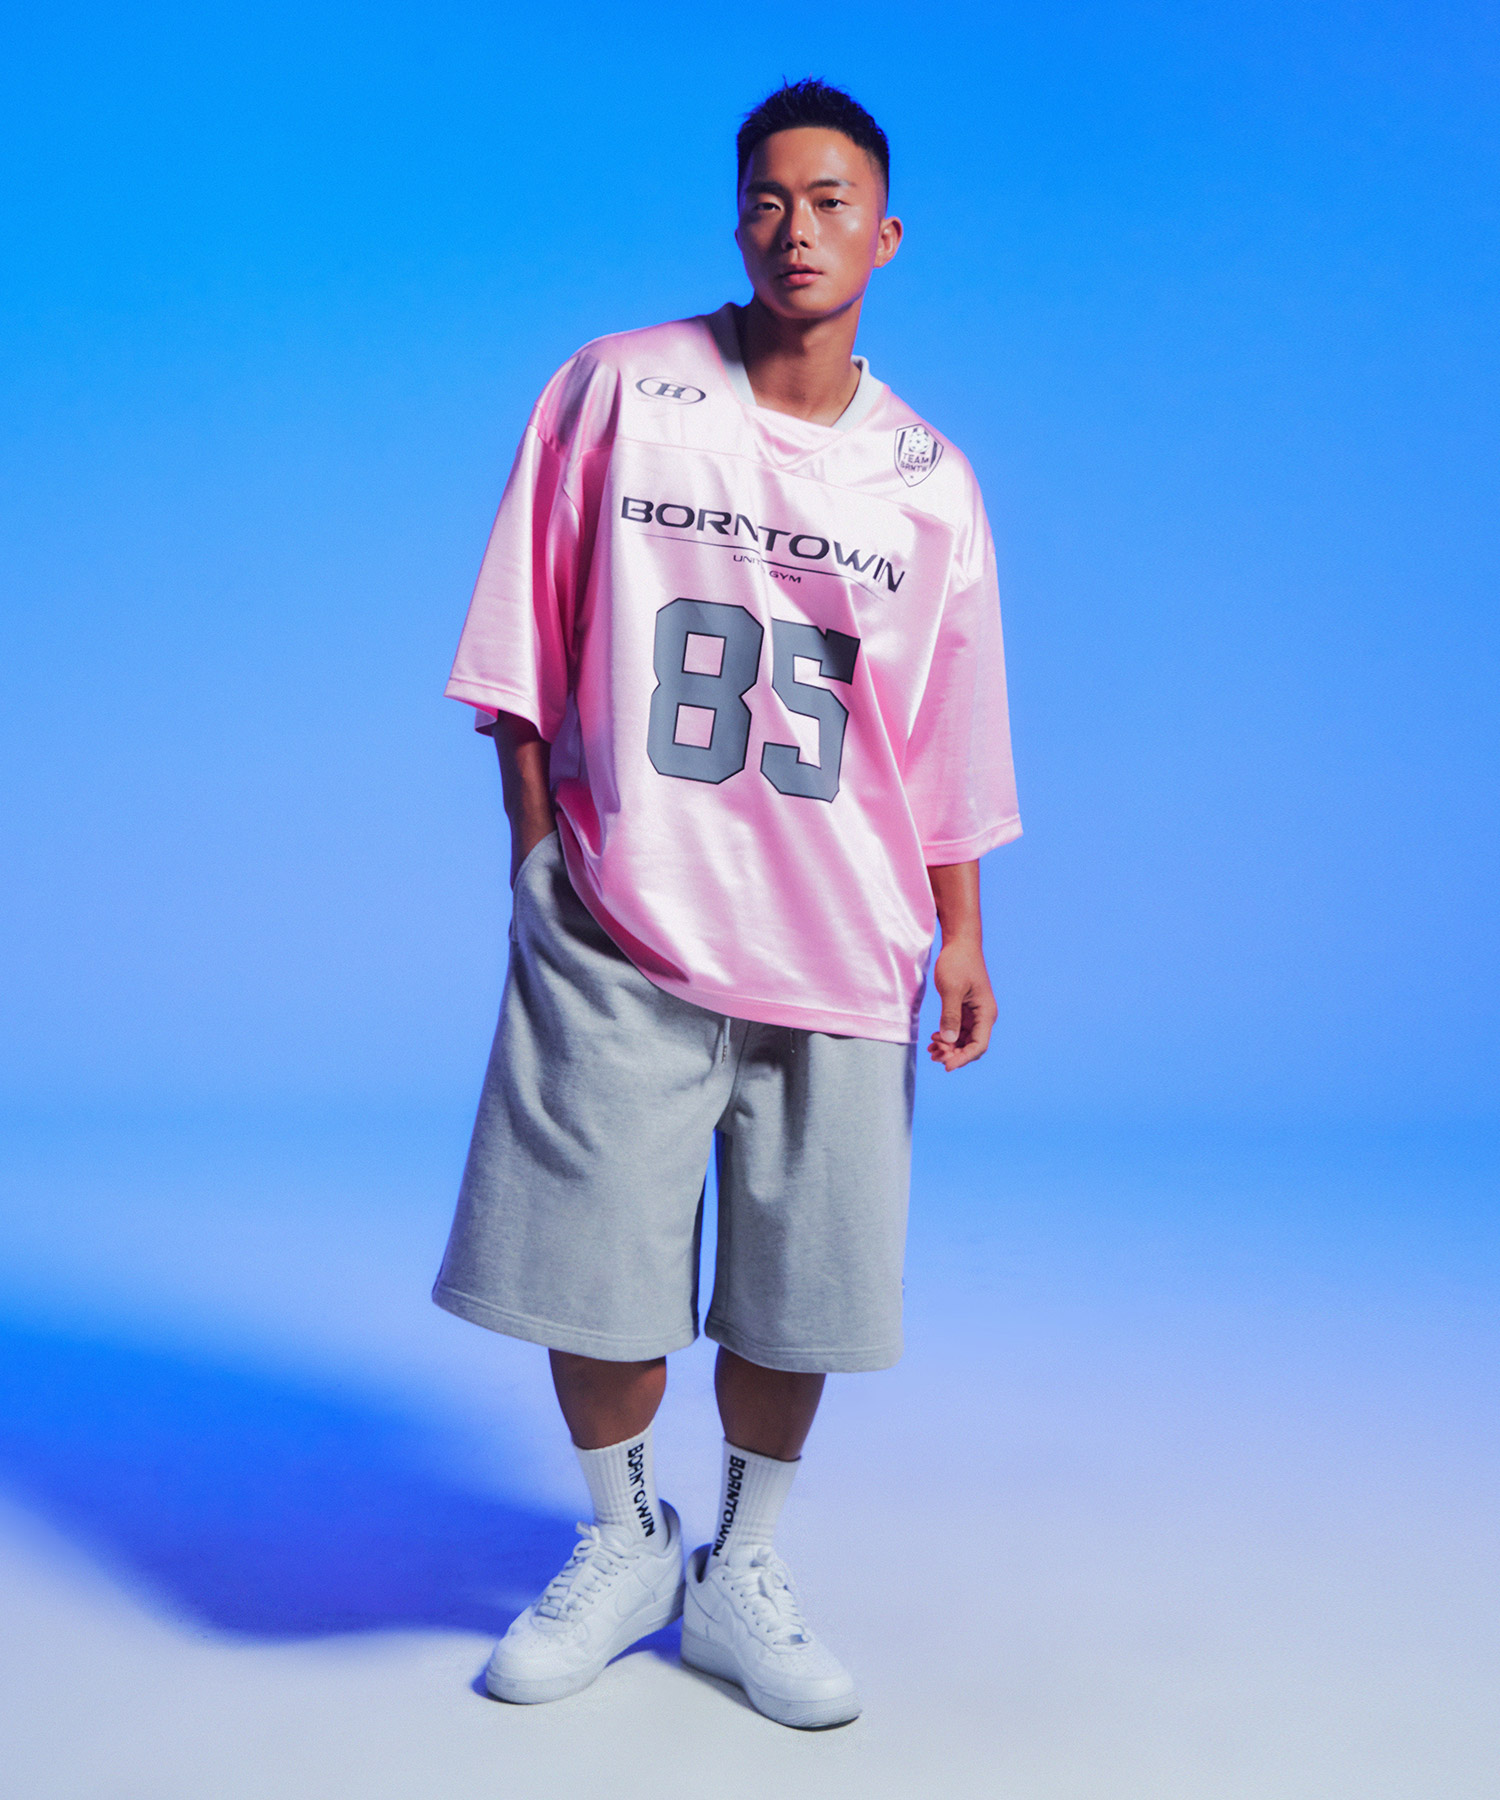 85 RUGBY JERSEY T-SHIRTS [PINK]